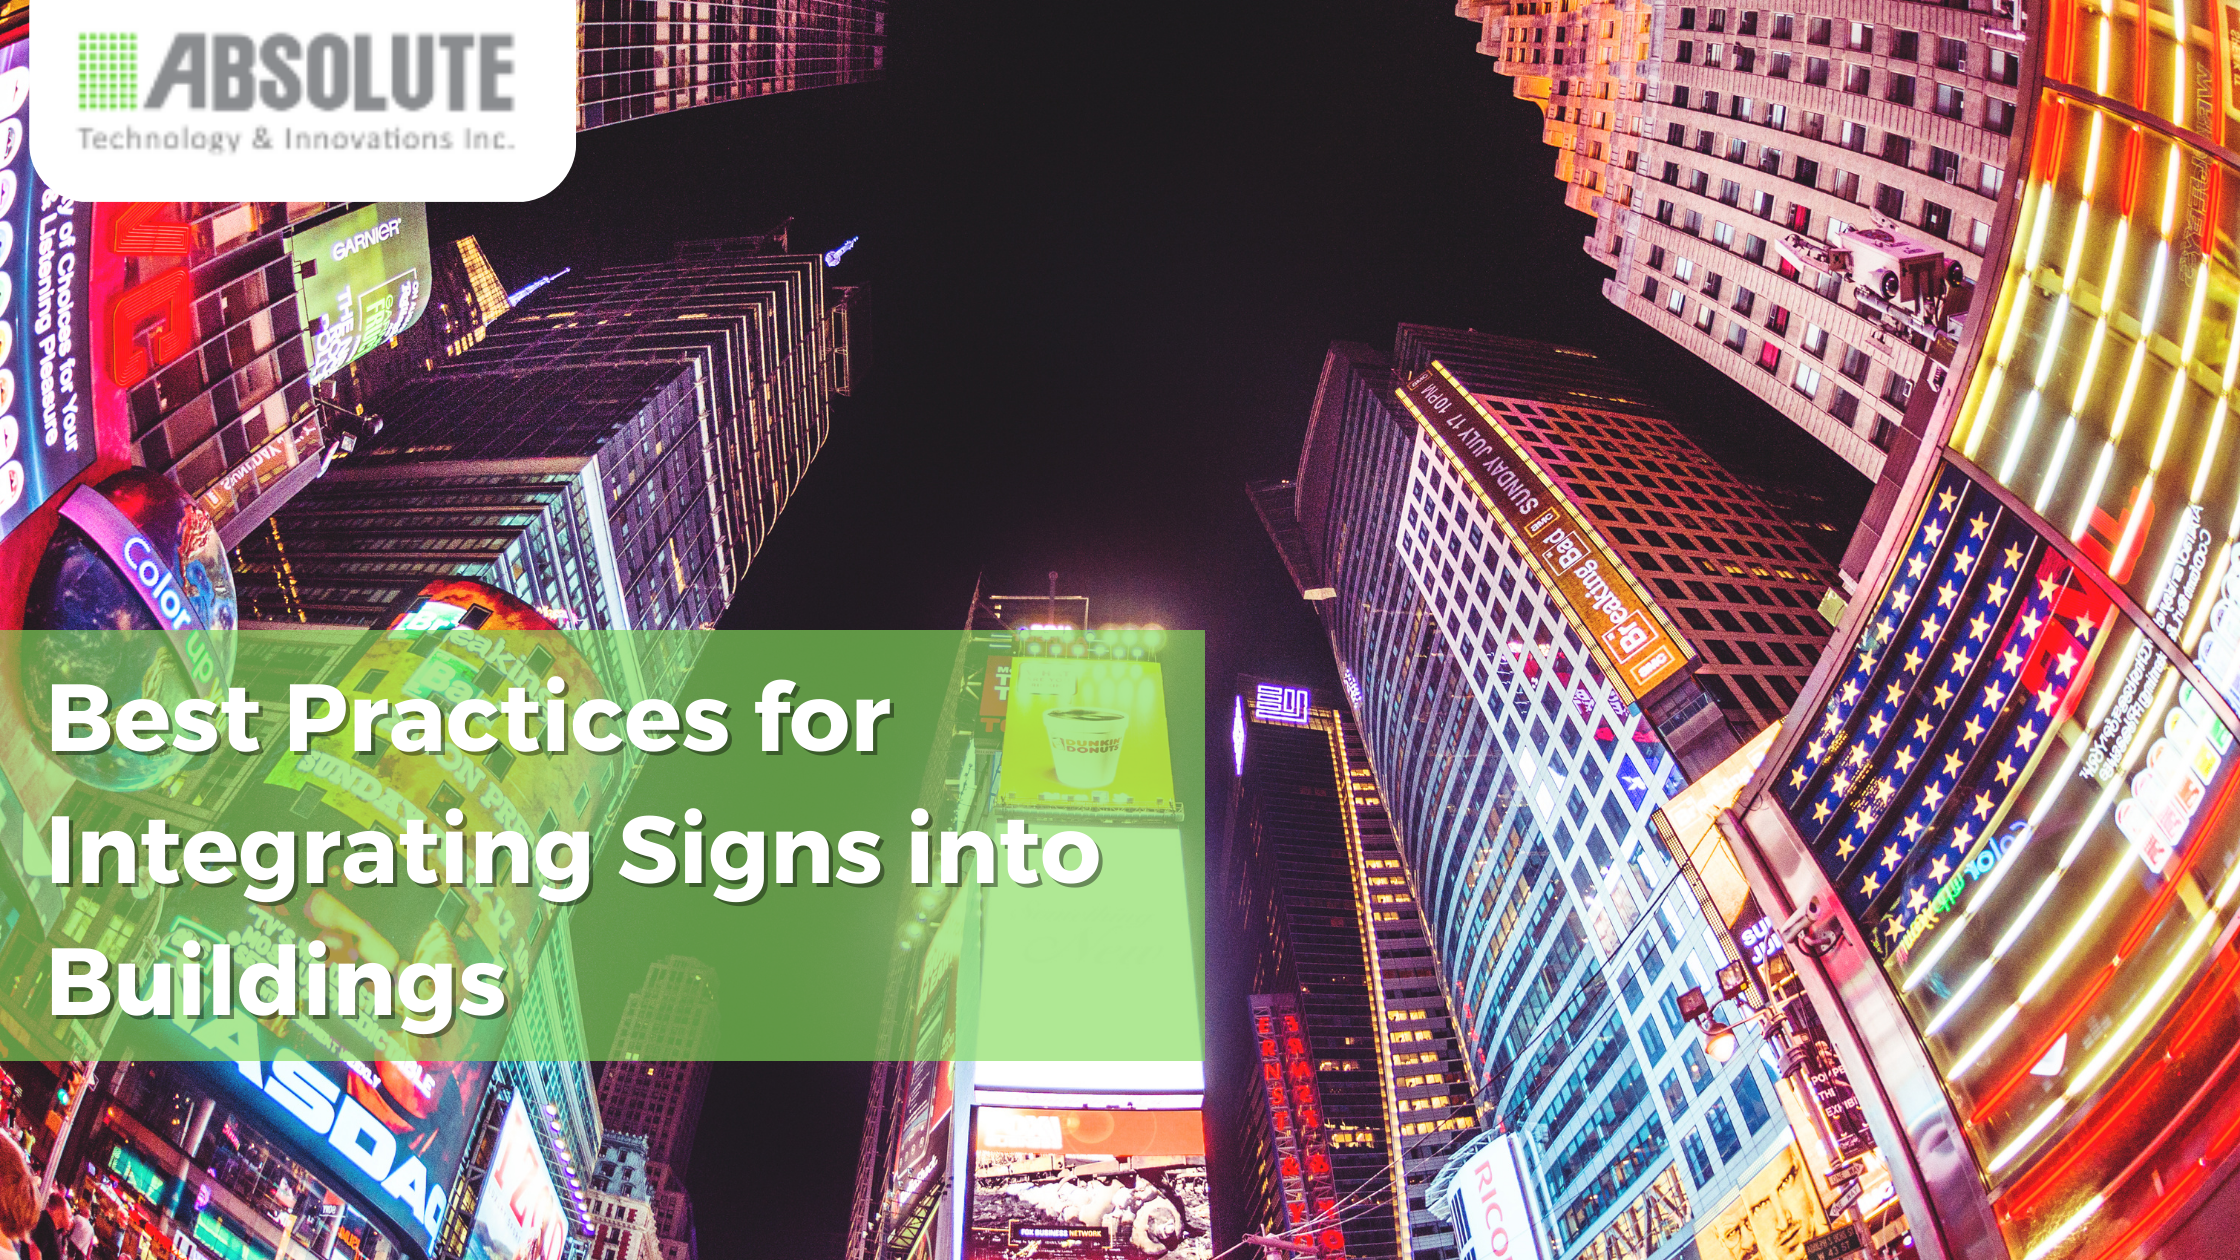 Integrating Signs into Buildings